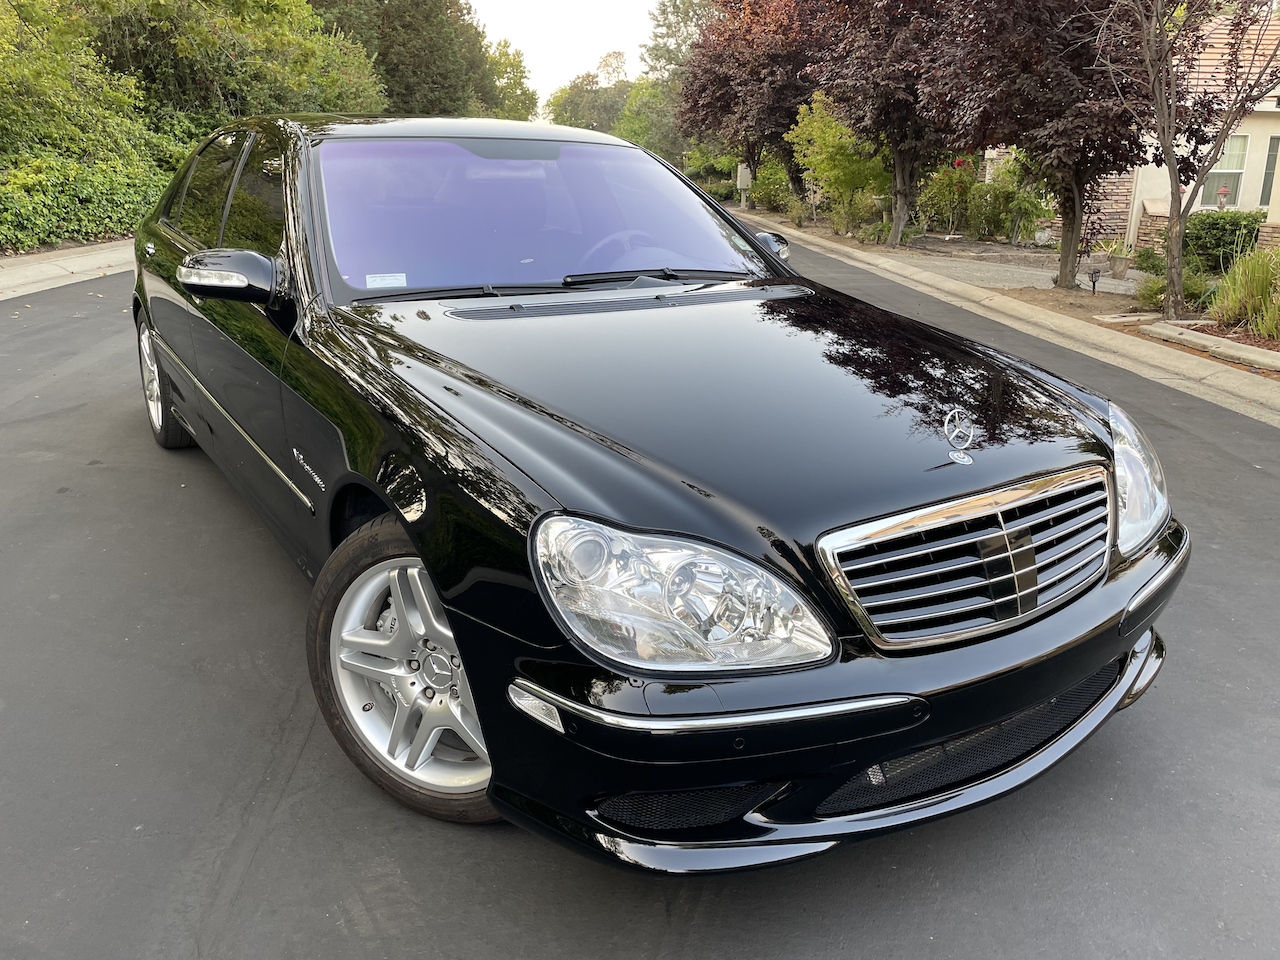 Charlotte Bronte Traditie geweten 2003 Mercedes-Benz S55 AMG w/34k Miles For Sale | The MB Market